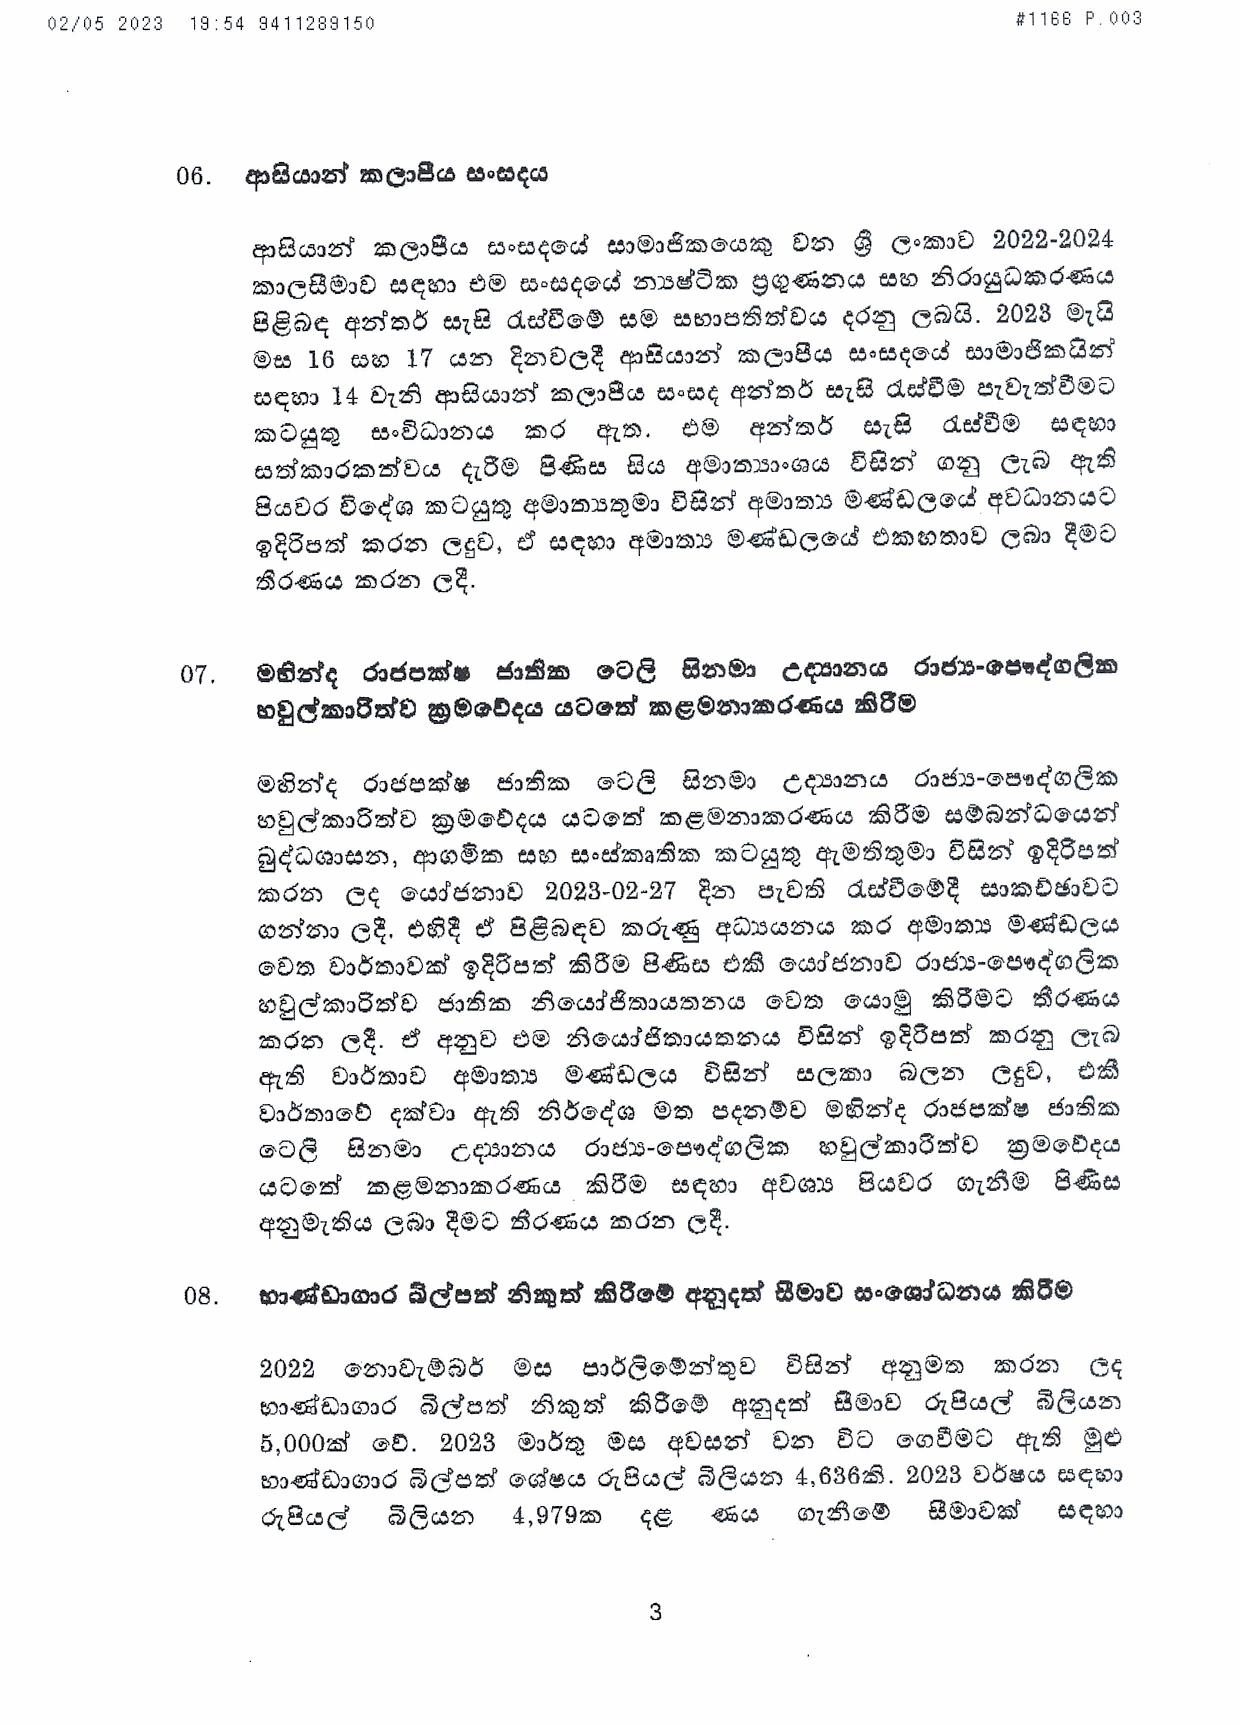 Cabinet Decisions on 02.05.2023 page 003